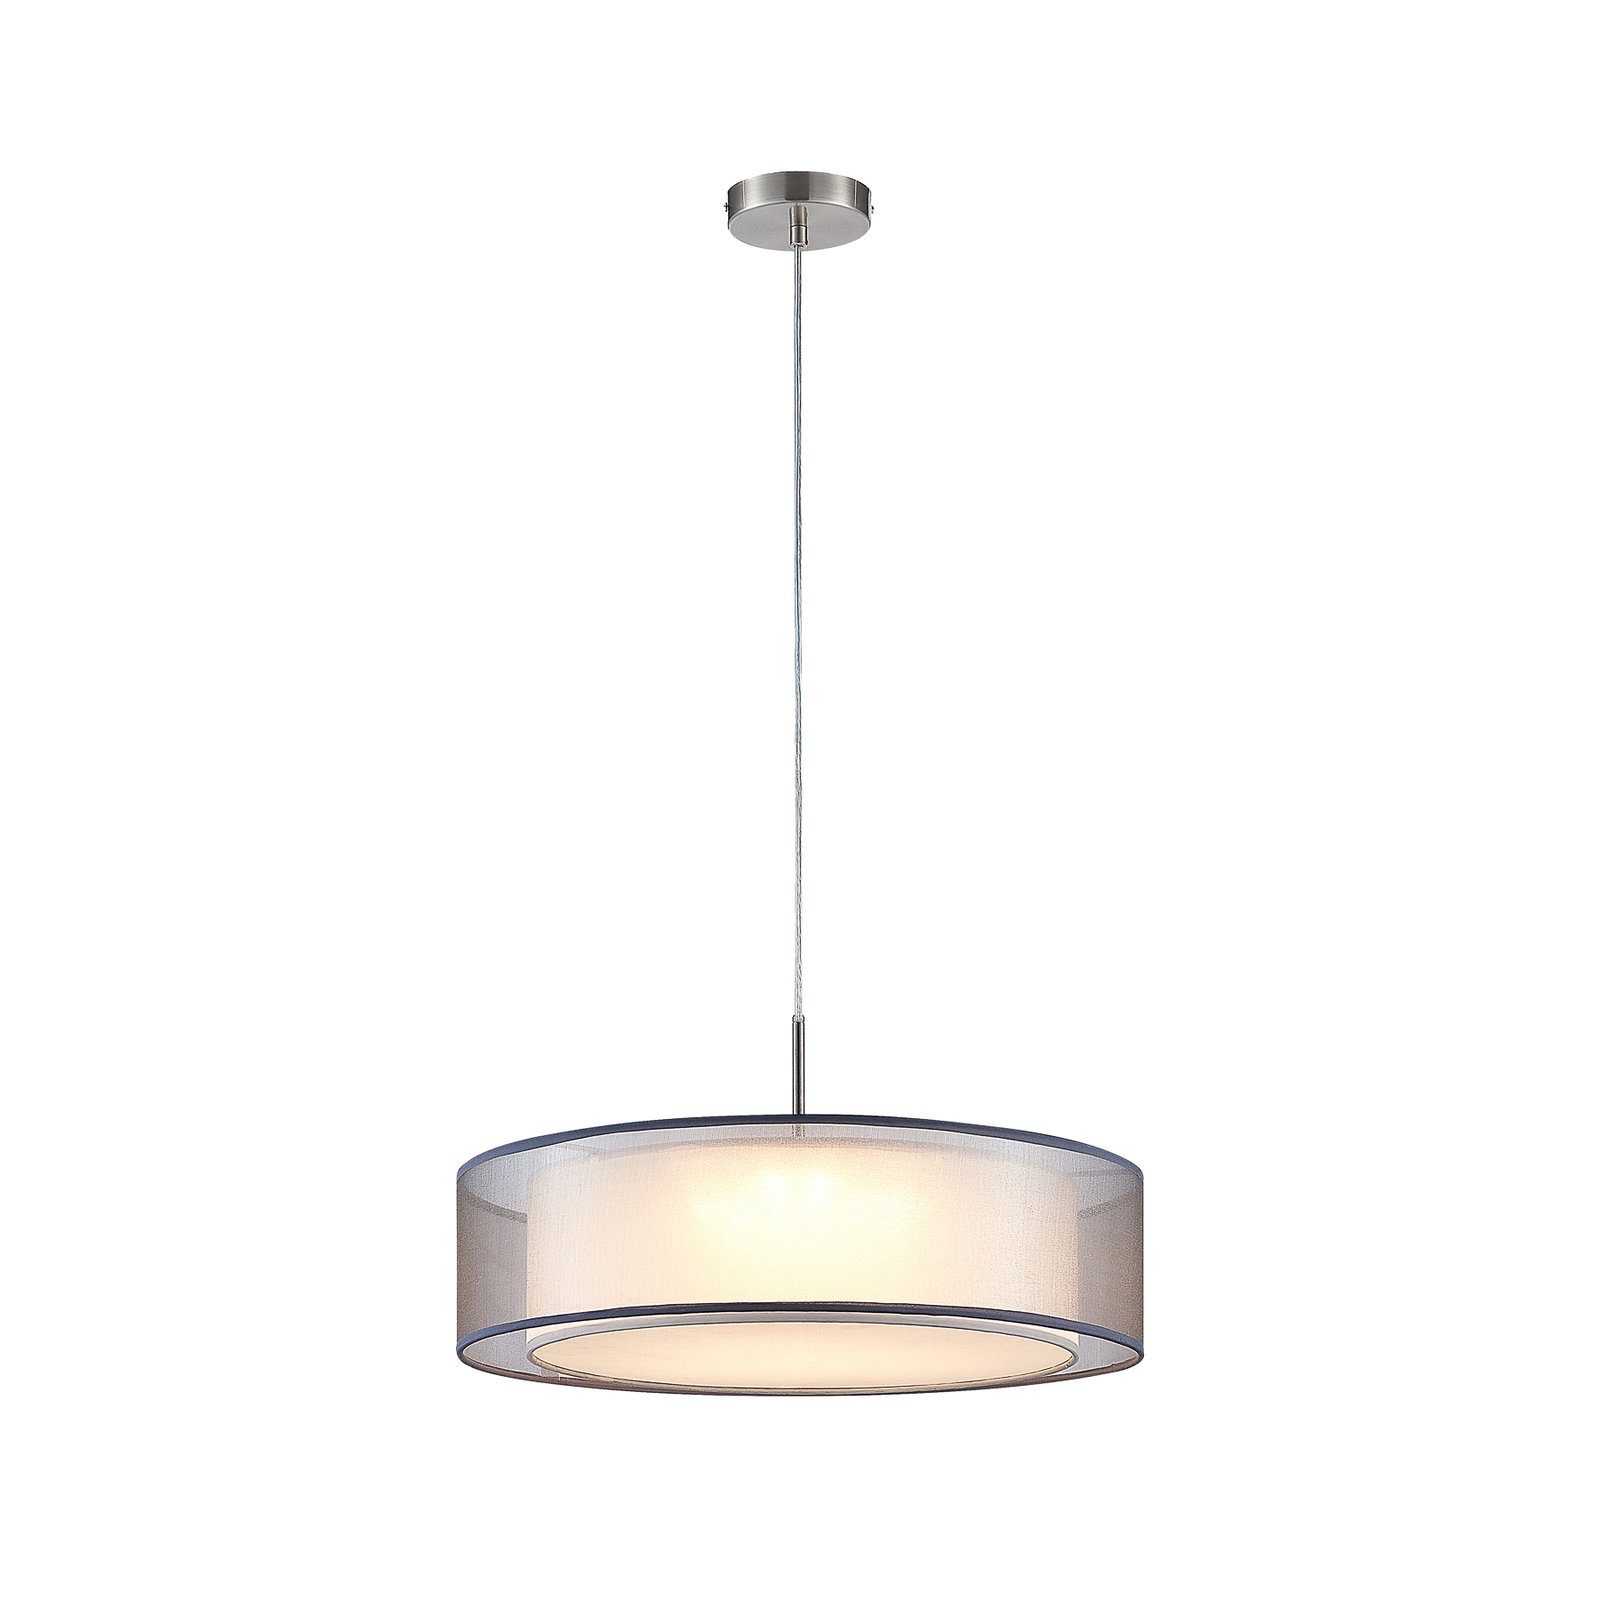 Chloe LED pendant light with a double lampshade